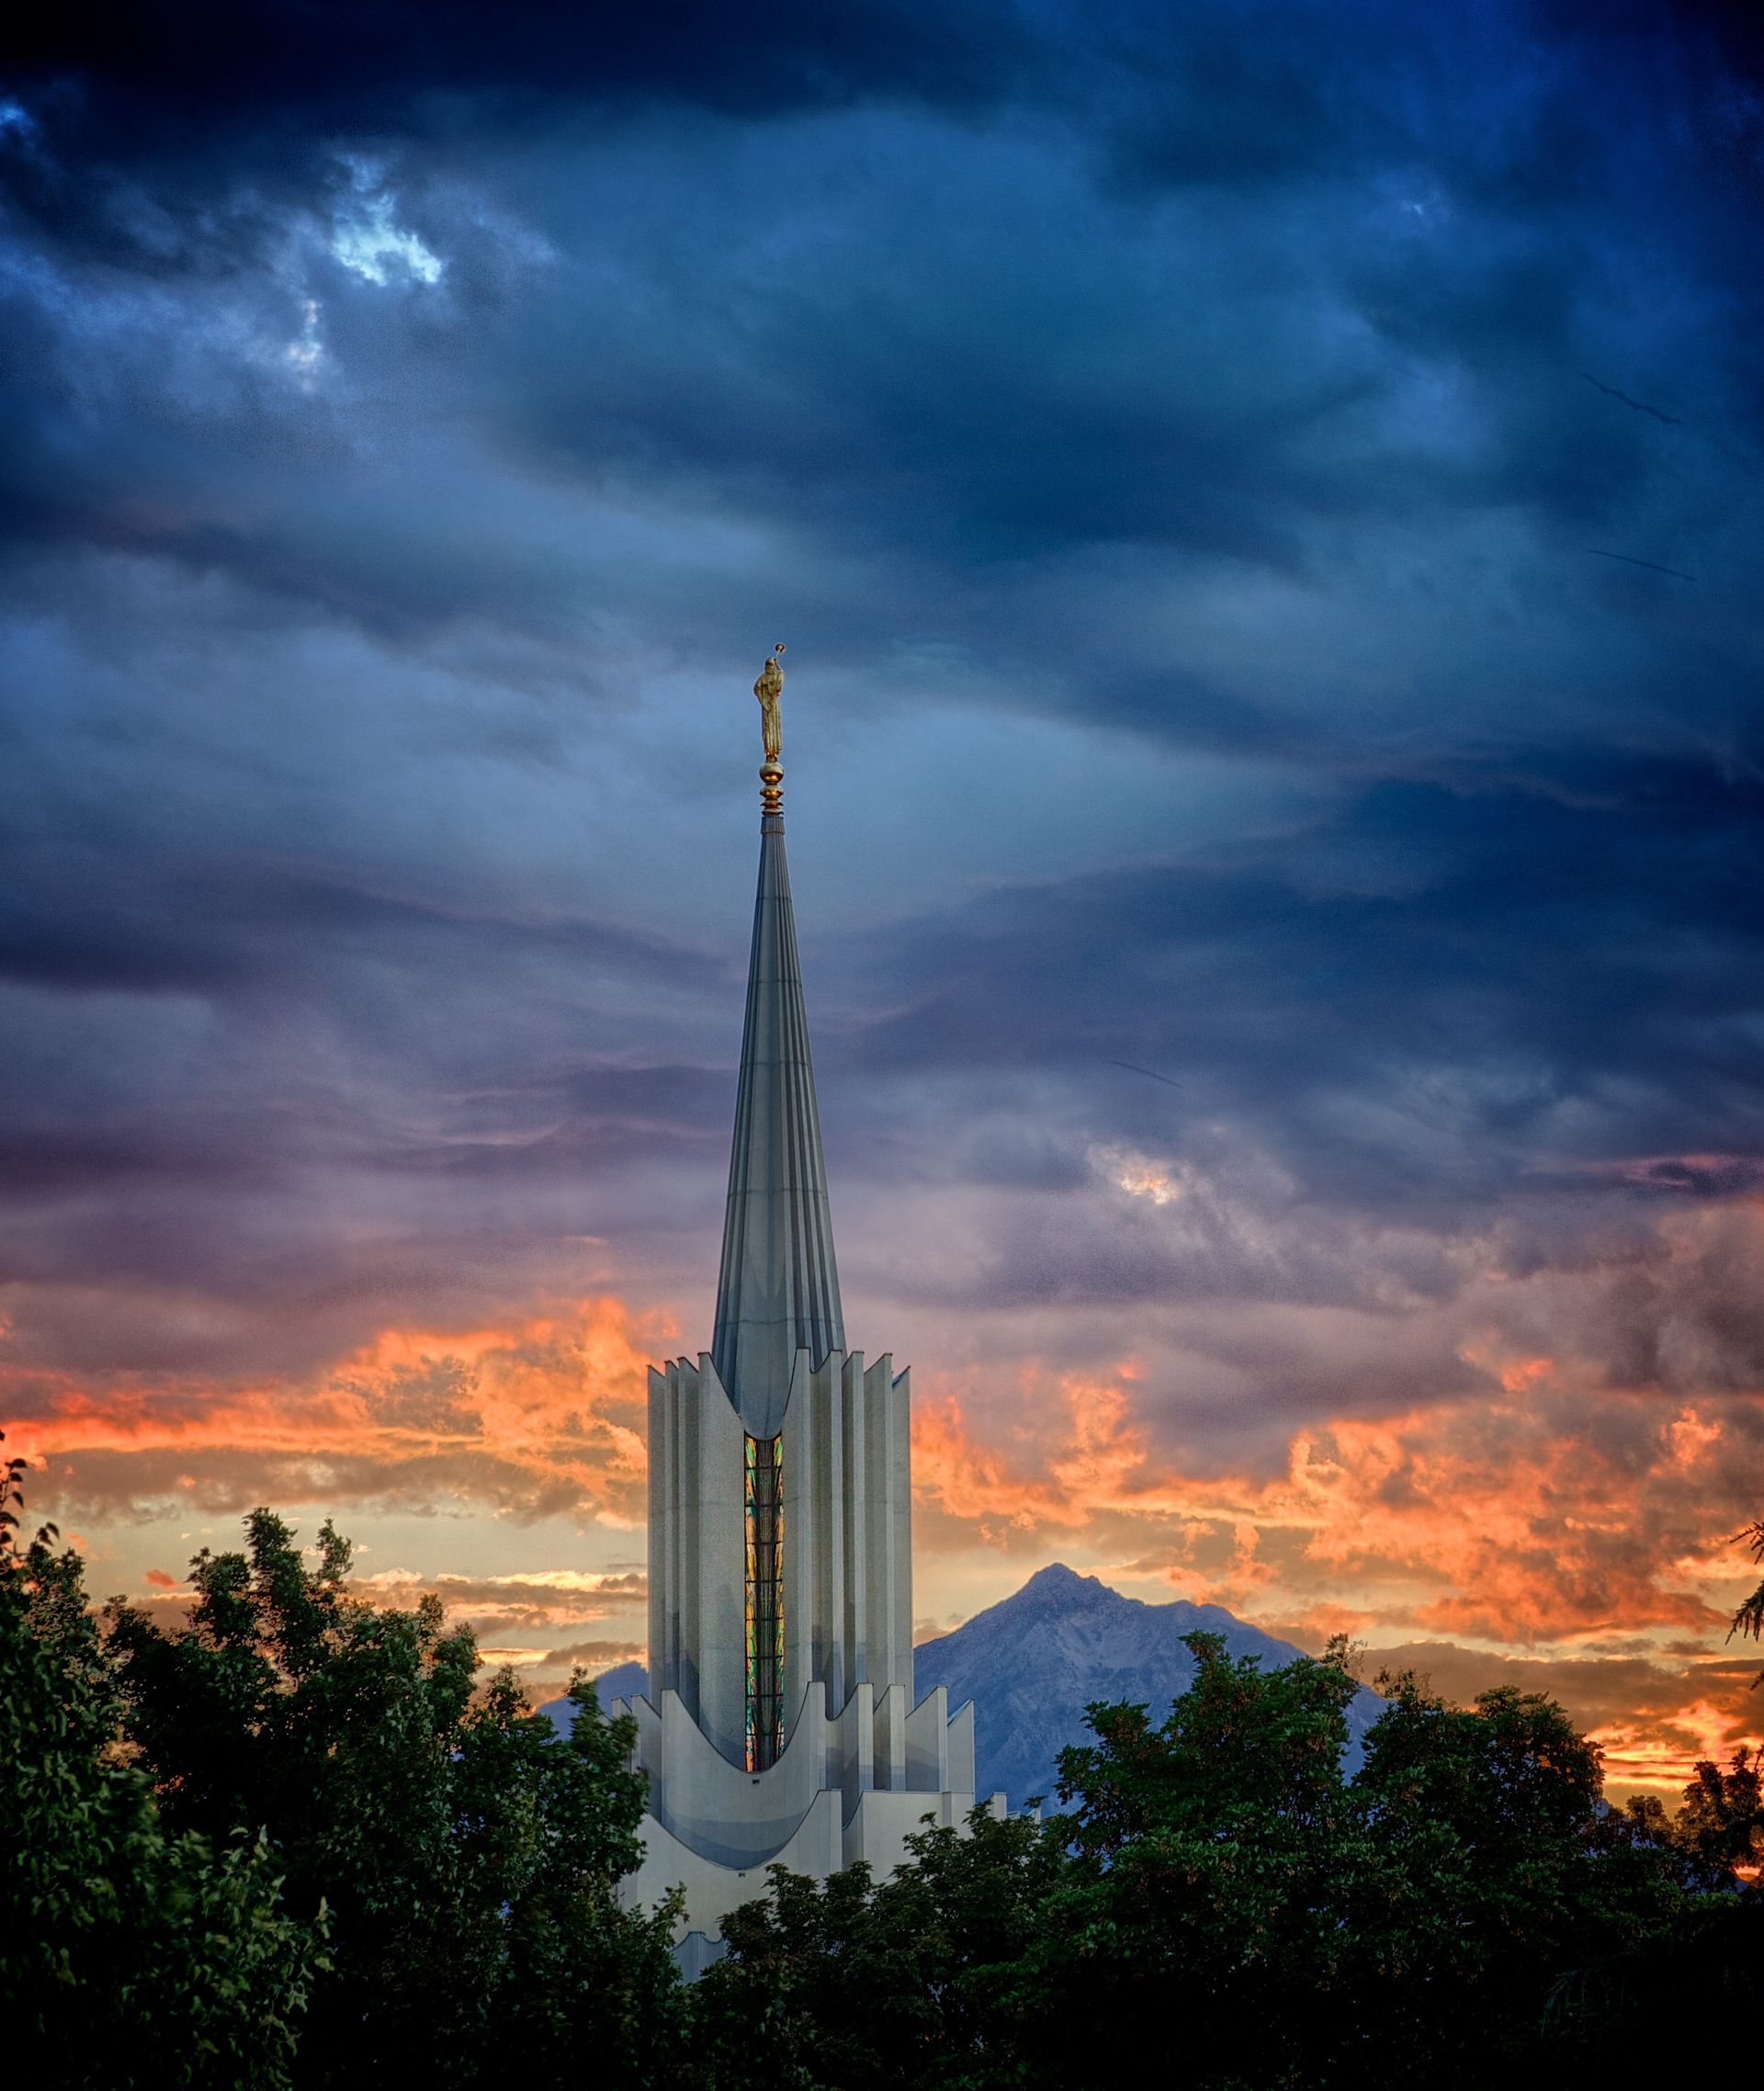 A view of the spire of the Jordan River Utah Temple at sunset.